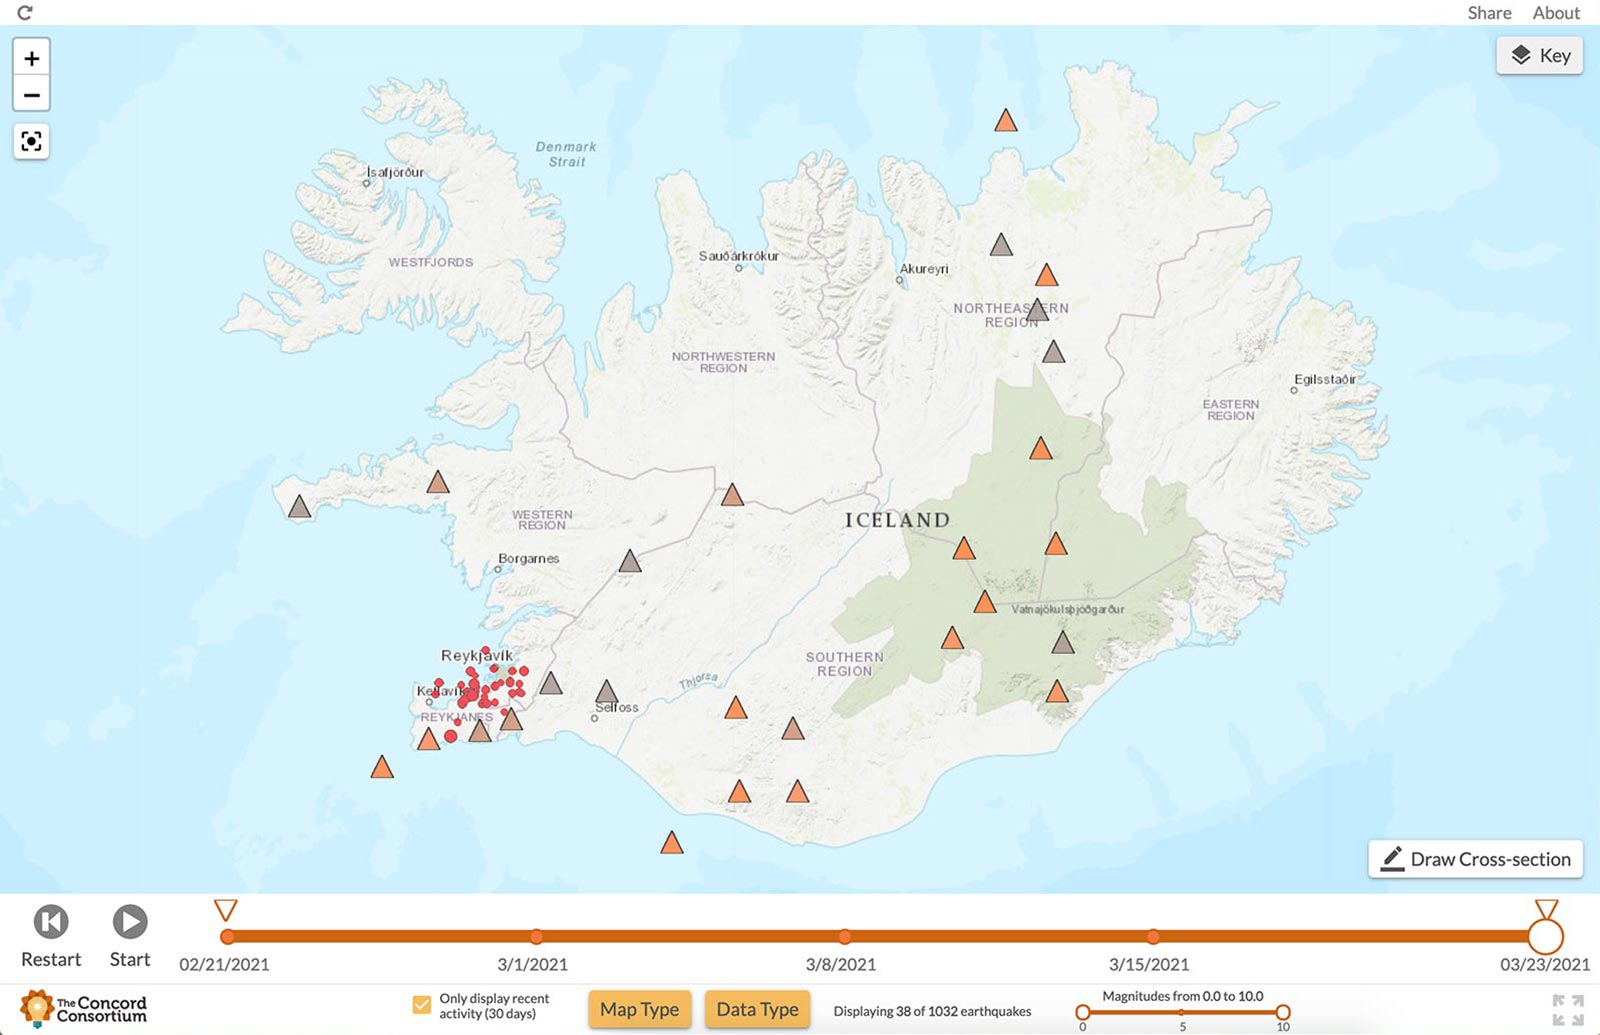 A map of Iceland showing the location of earthquakes (circles) and volcanic eruptions (triangles)